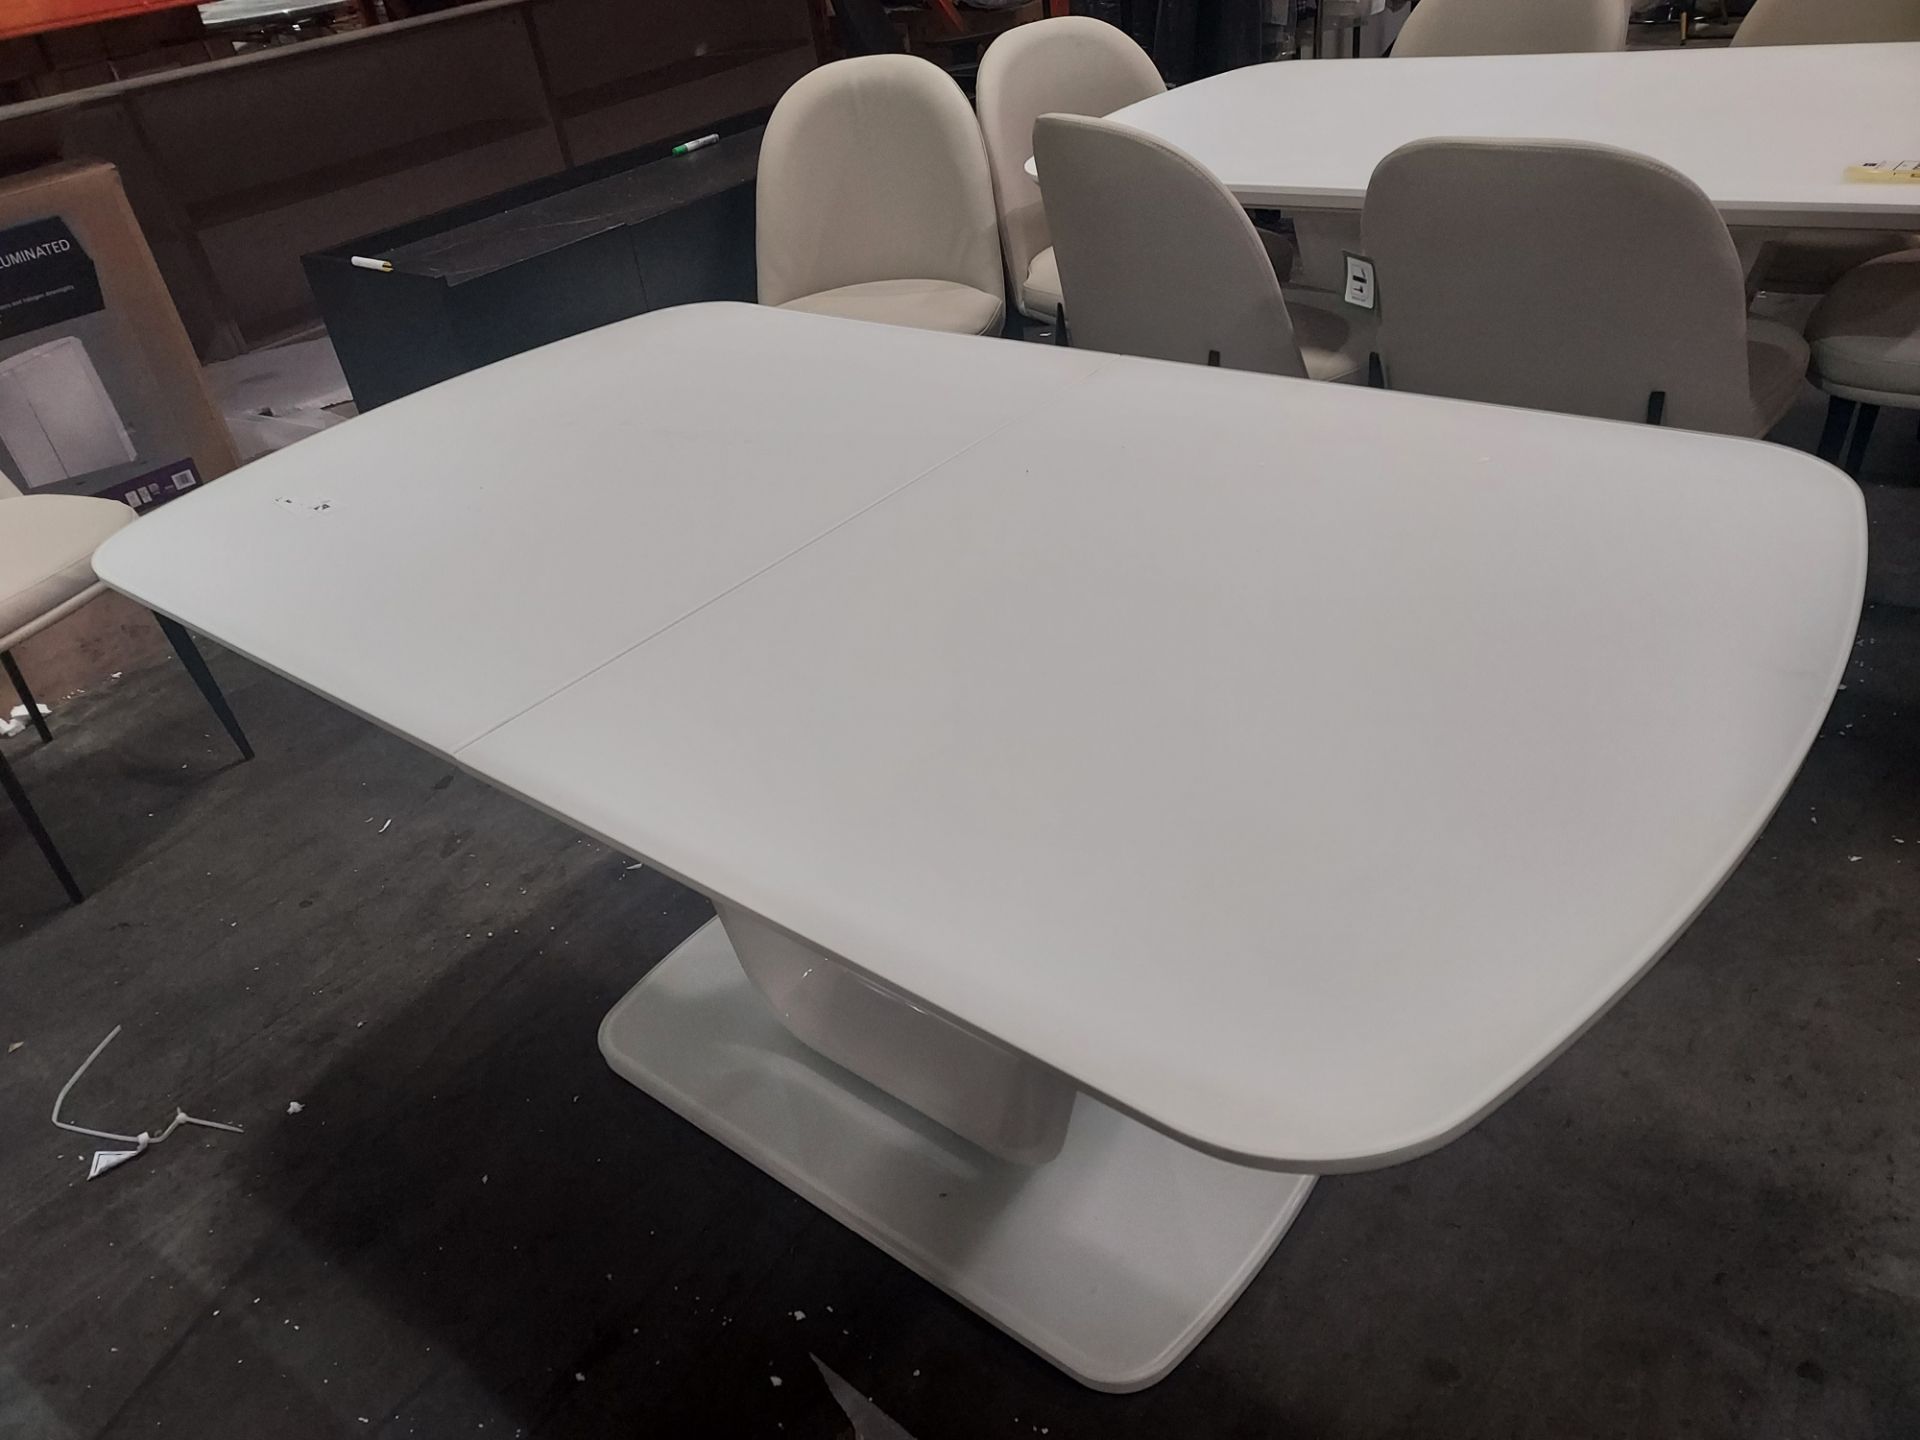 1 X LAZZARO DINING TABLE IN WHITE EXTENDING 1600/2000 X 900mm (PLEASE NOTE CUSTOMER RETURNS)